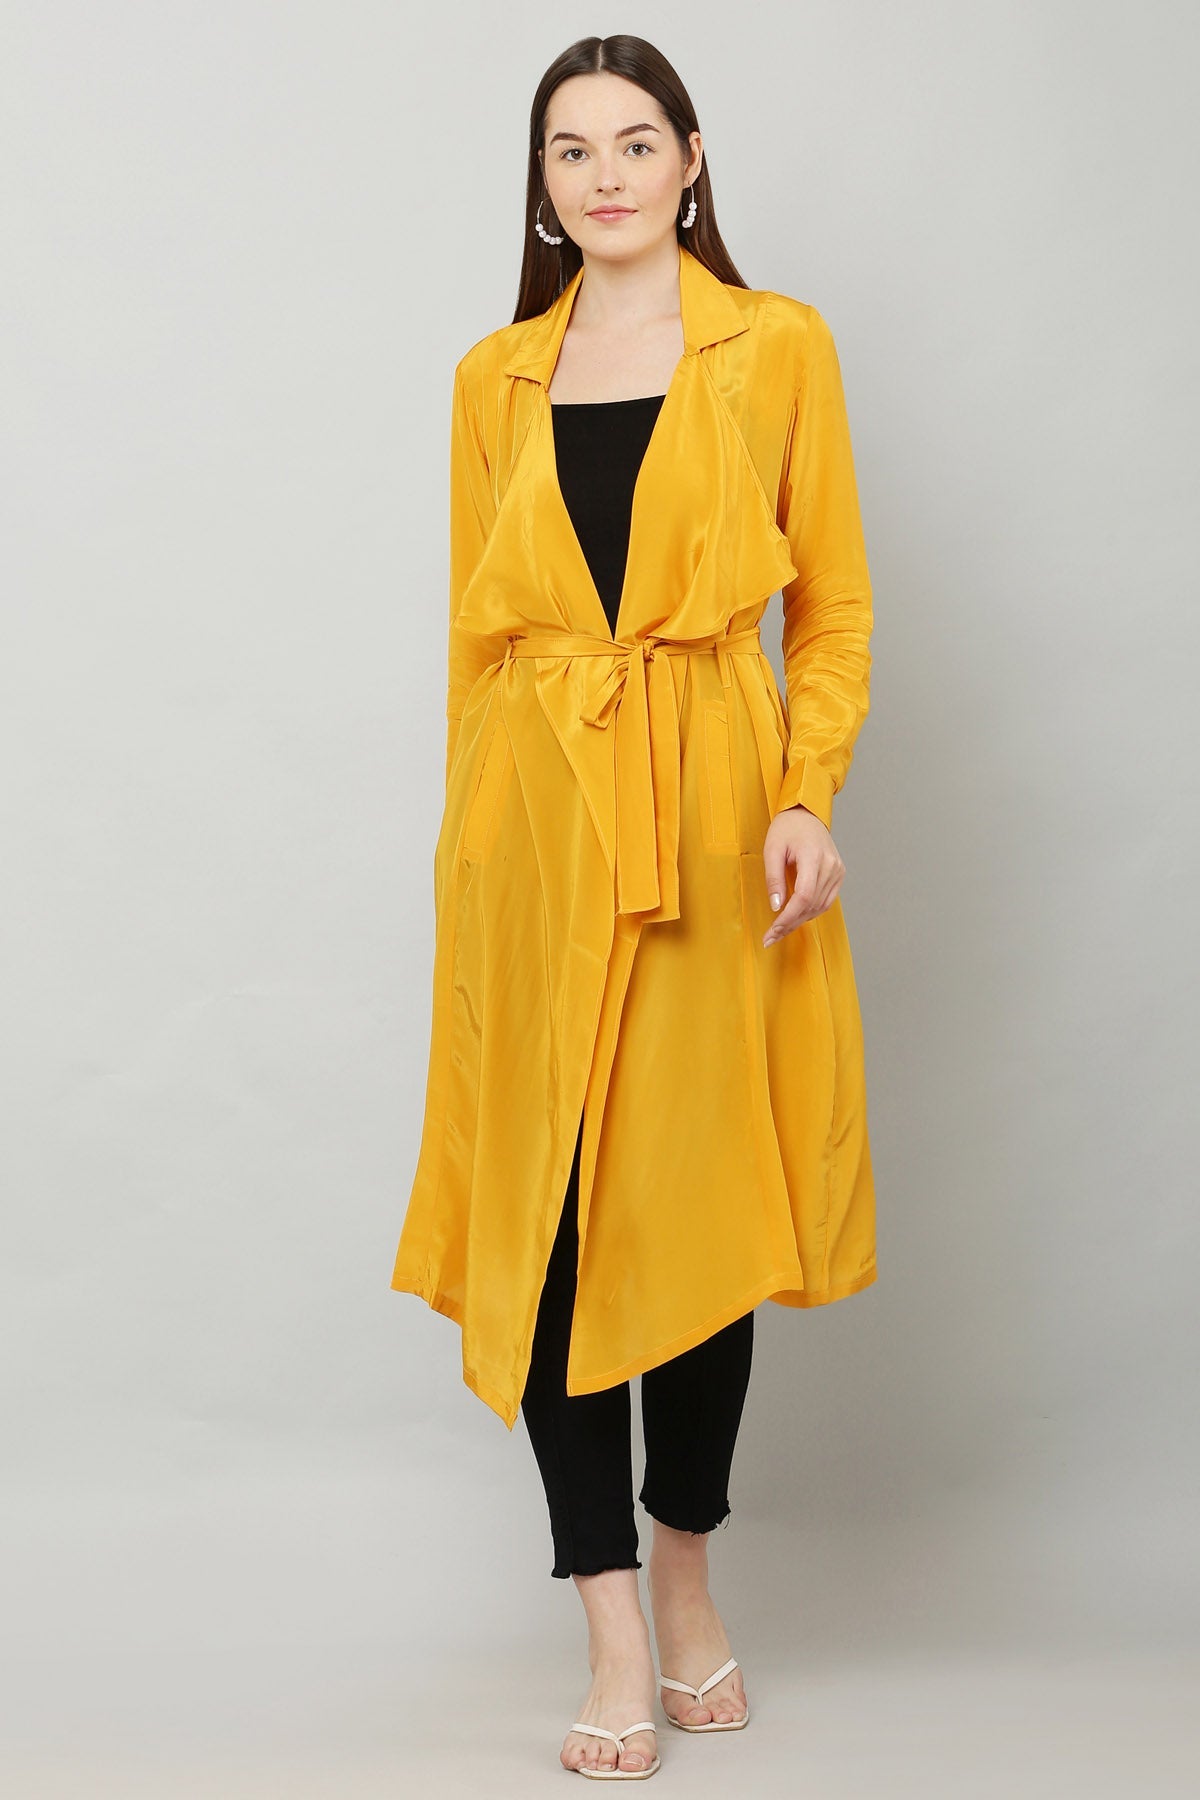 Designer Kusmi Radiant Ray: Flowing Yellow Crepe Jacket with Self-Tie For Women at ScrollnShops